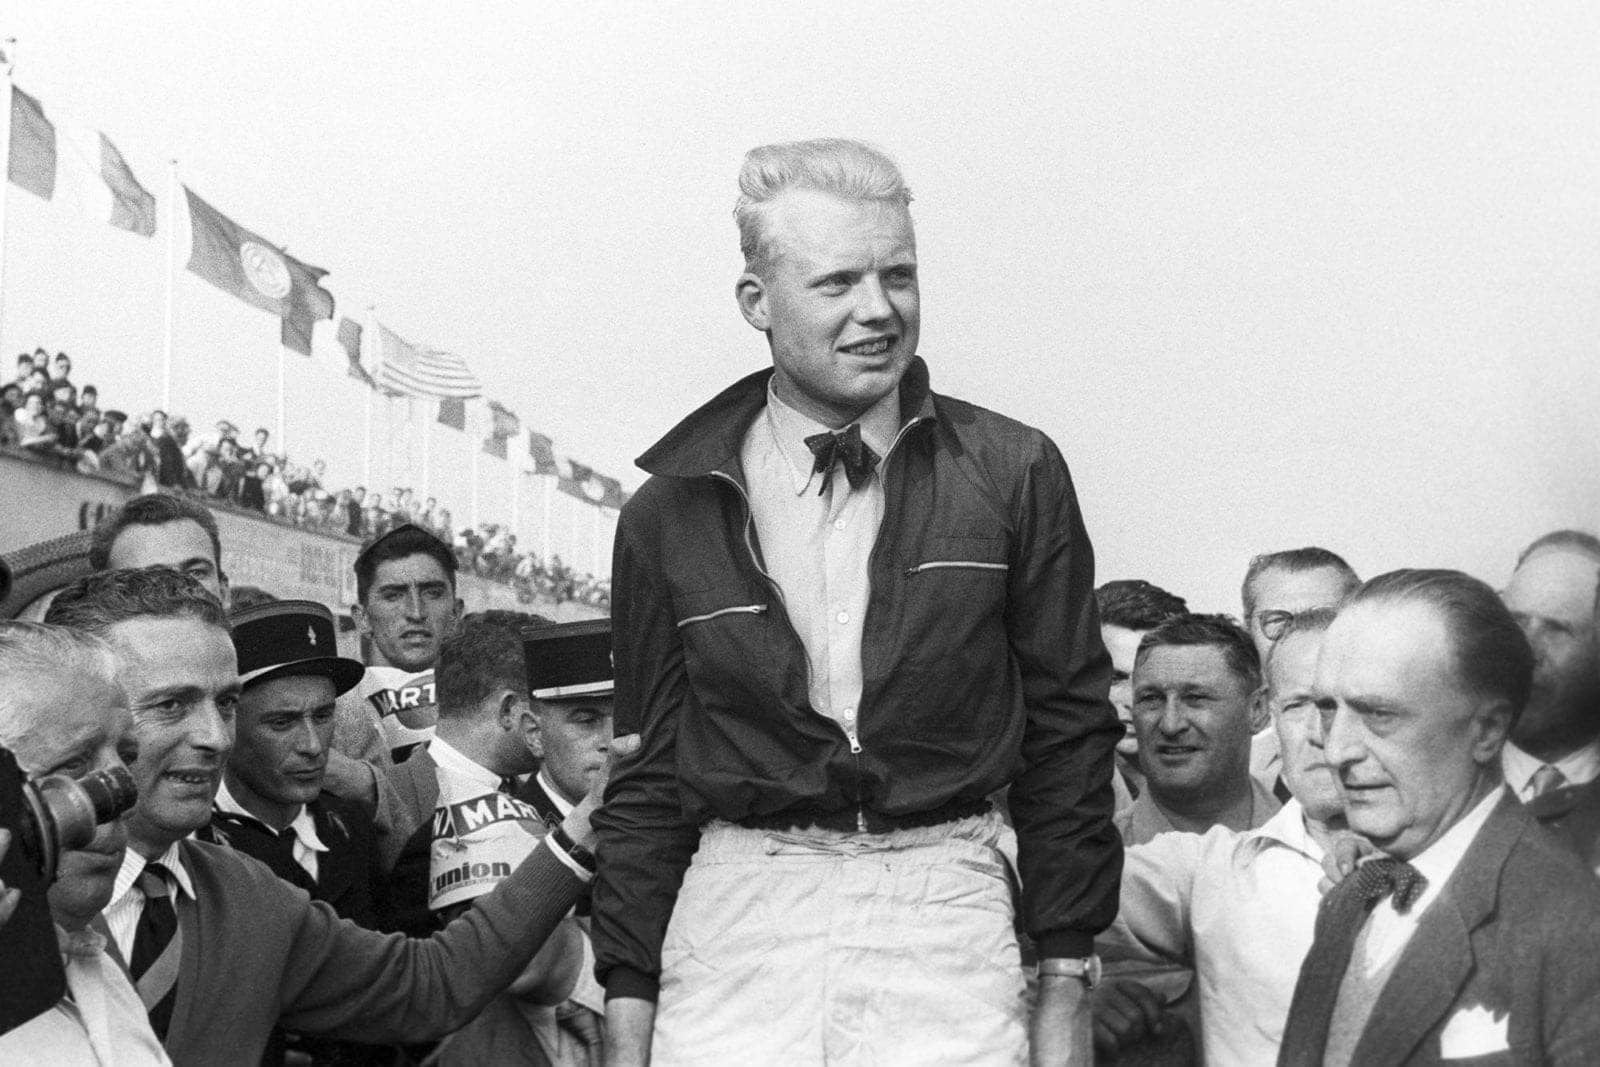 Mike Hawthorn, Grand Prix of France, Reims, 05 July 1953. Mike Hawthorn's first Grand Prix victory. (Photo by Bernard Cahier/Getty Images)